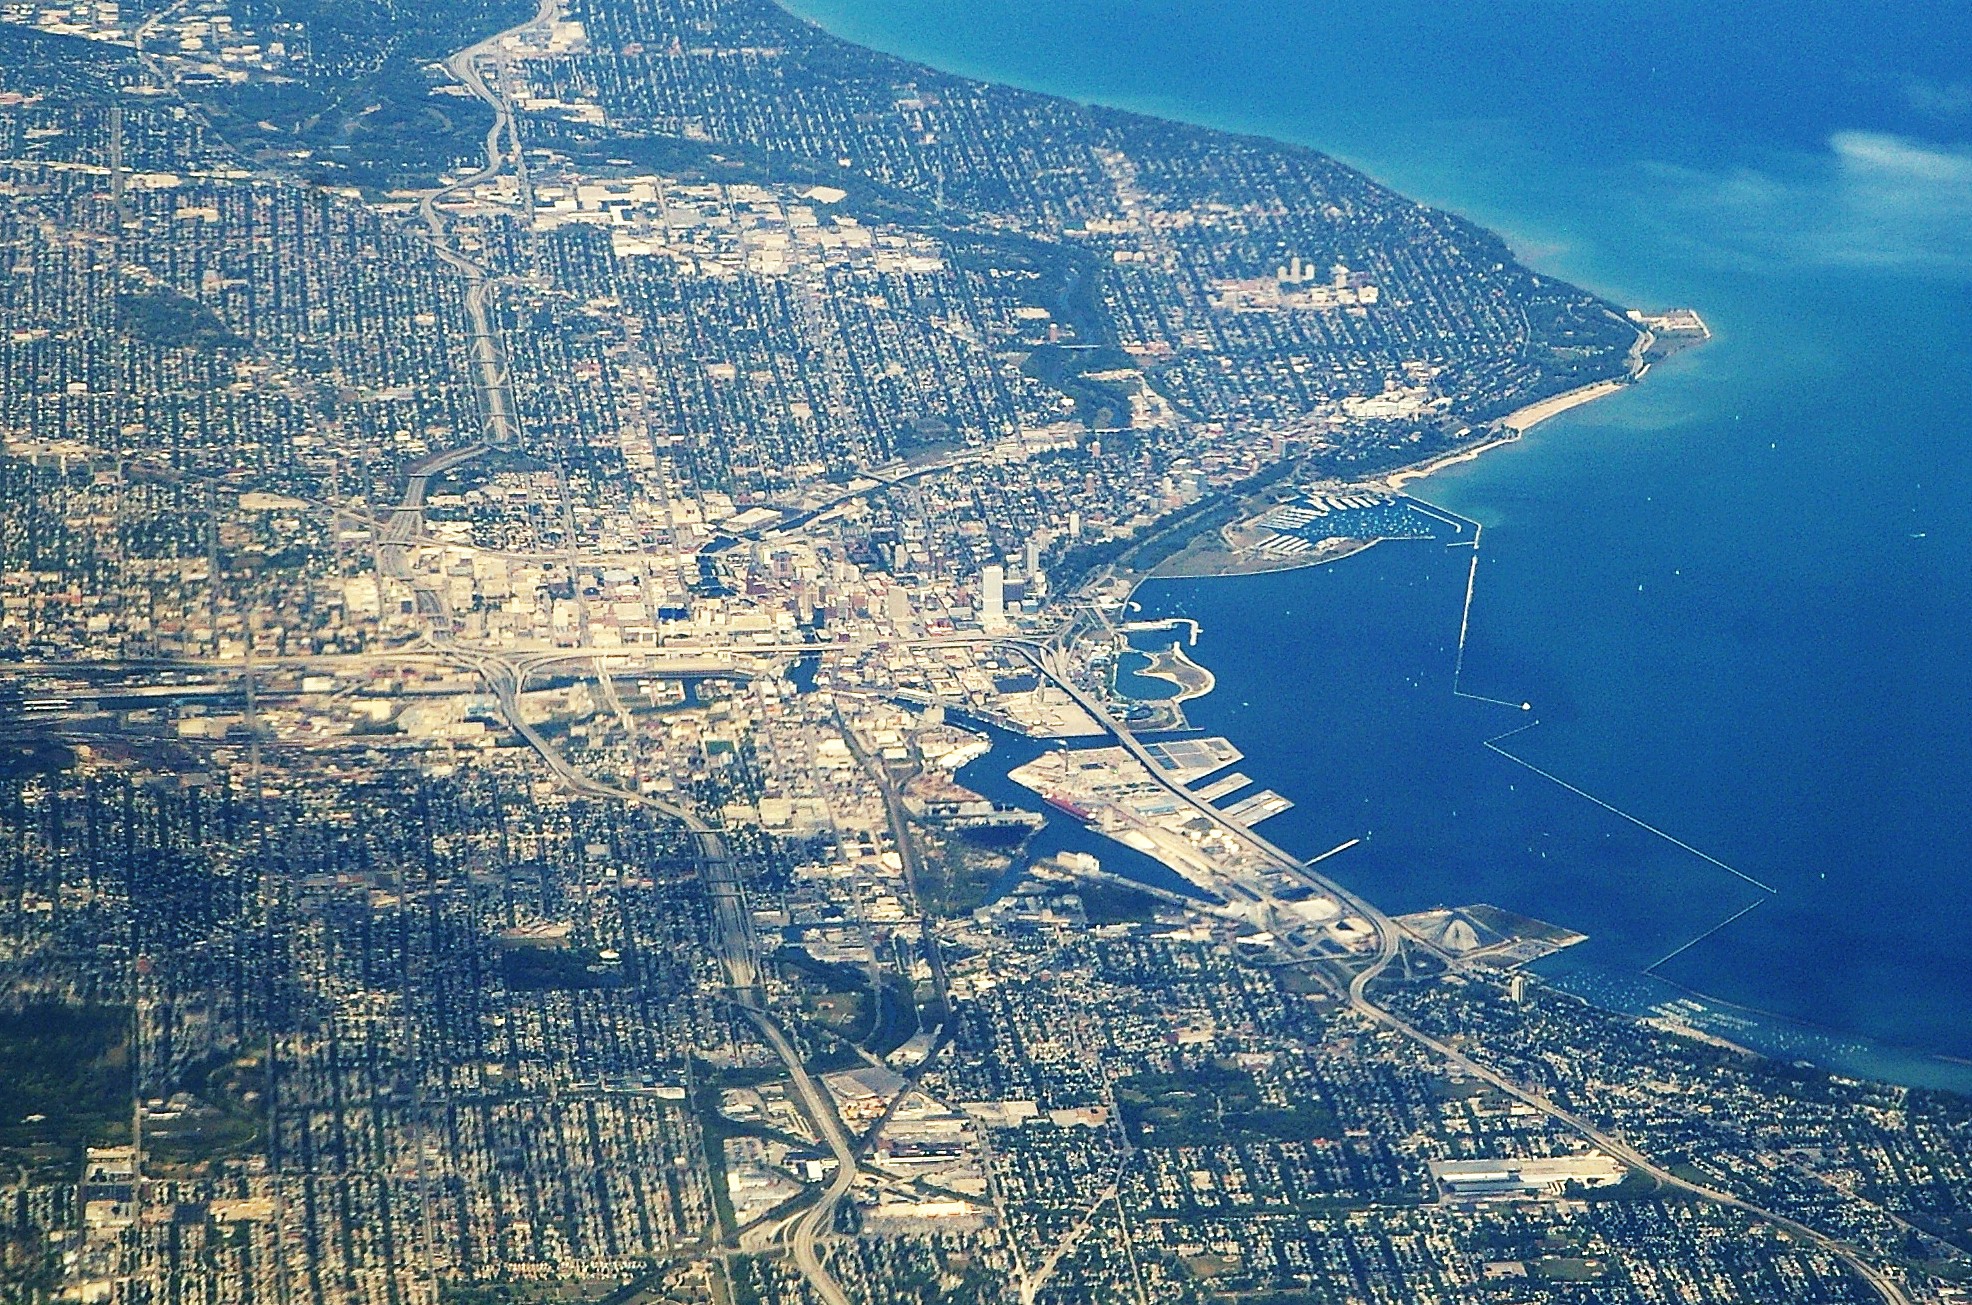 The city of Milwaukee on the western coast of Lake Michigan uses the lake for its drinking water. But just 17 miles to the west, the city of Waukesha is prohibited from using Great Lakes water unless it gets permission from the eight Great Lakes states. Photo: Ron Reiring via Flickr